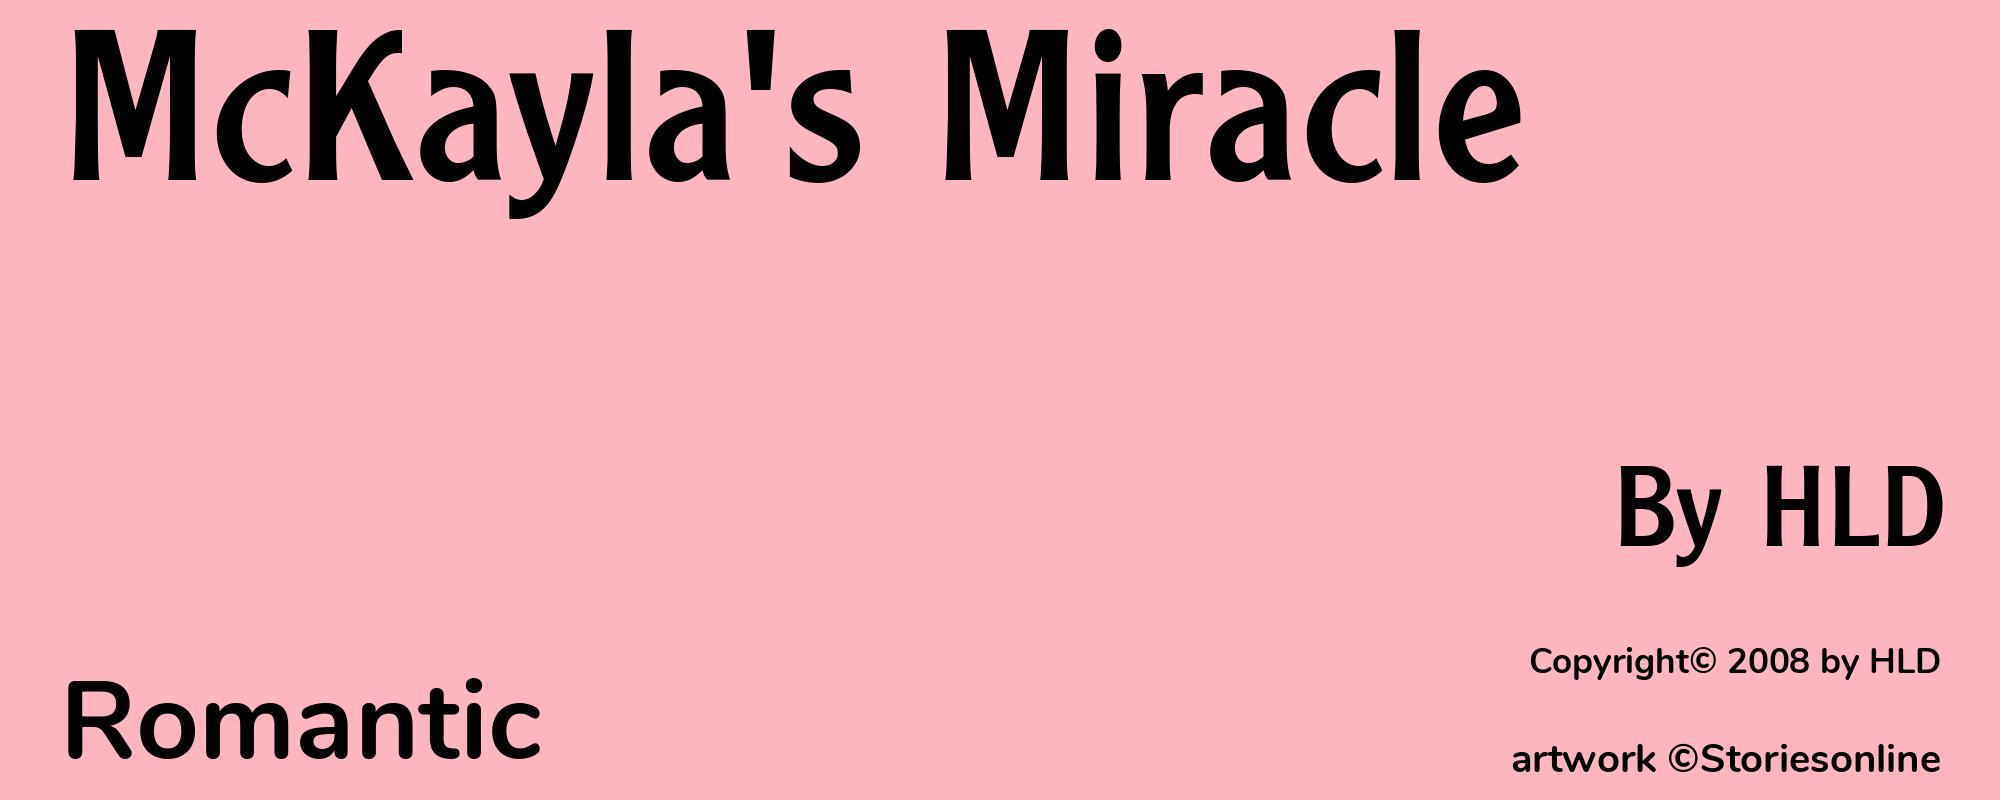 McKayla's Miracle - Cover